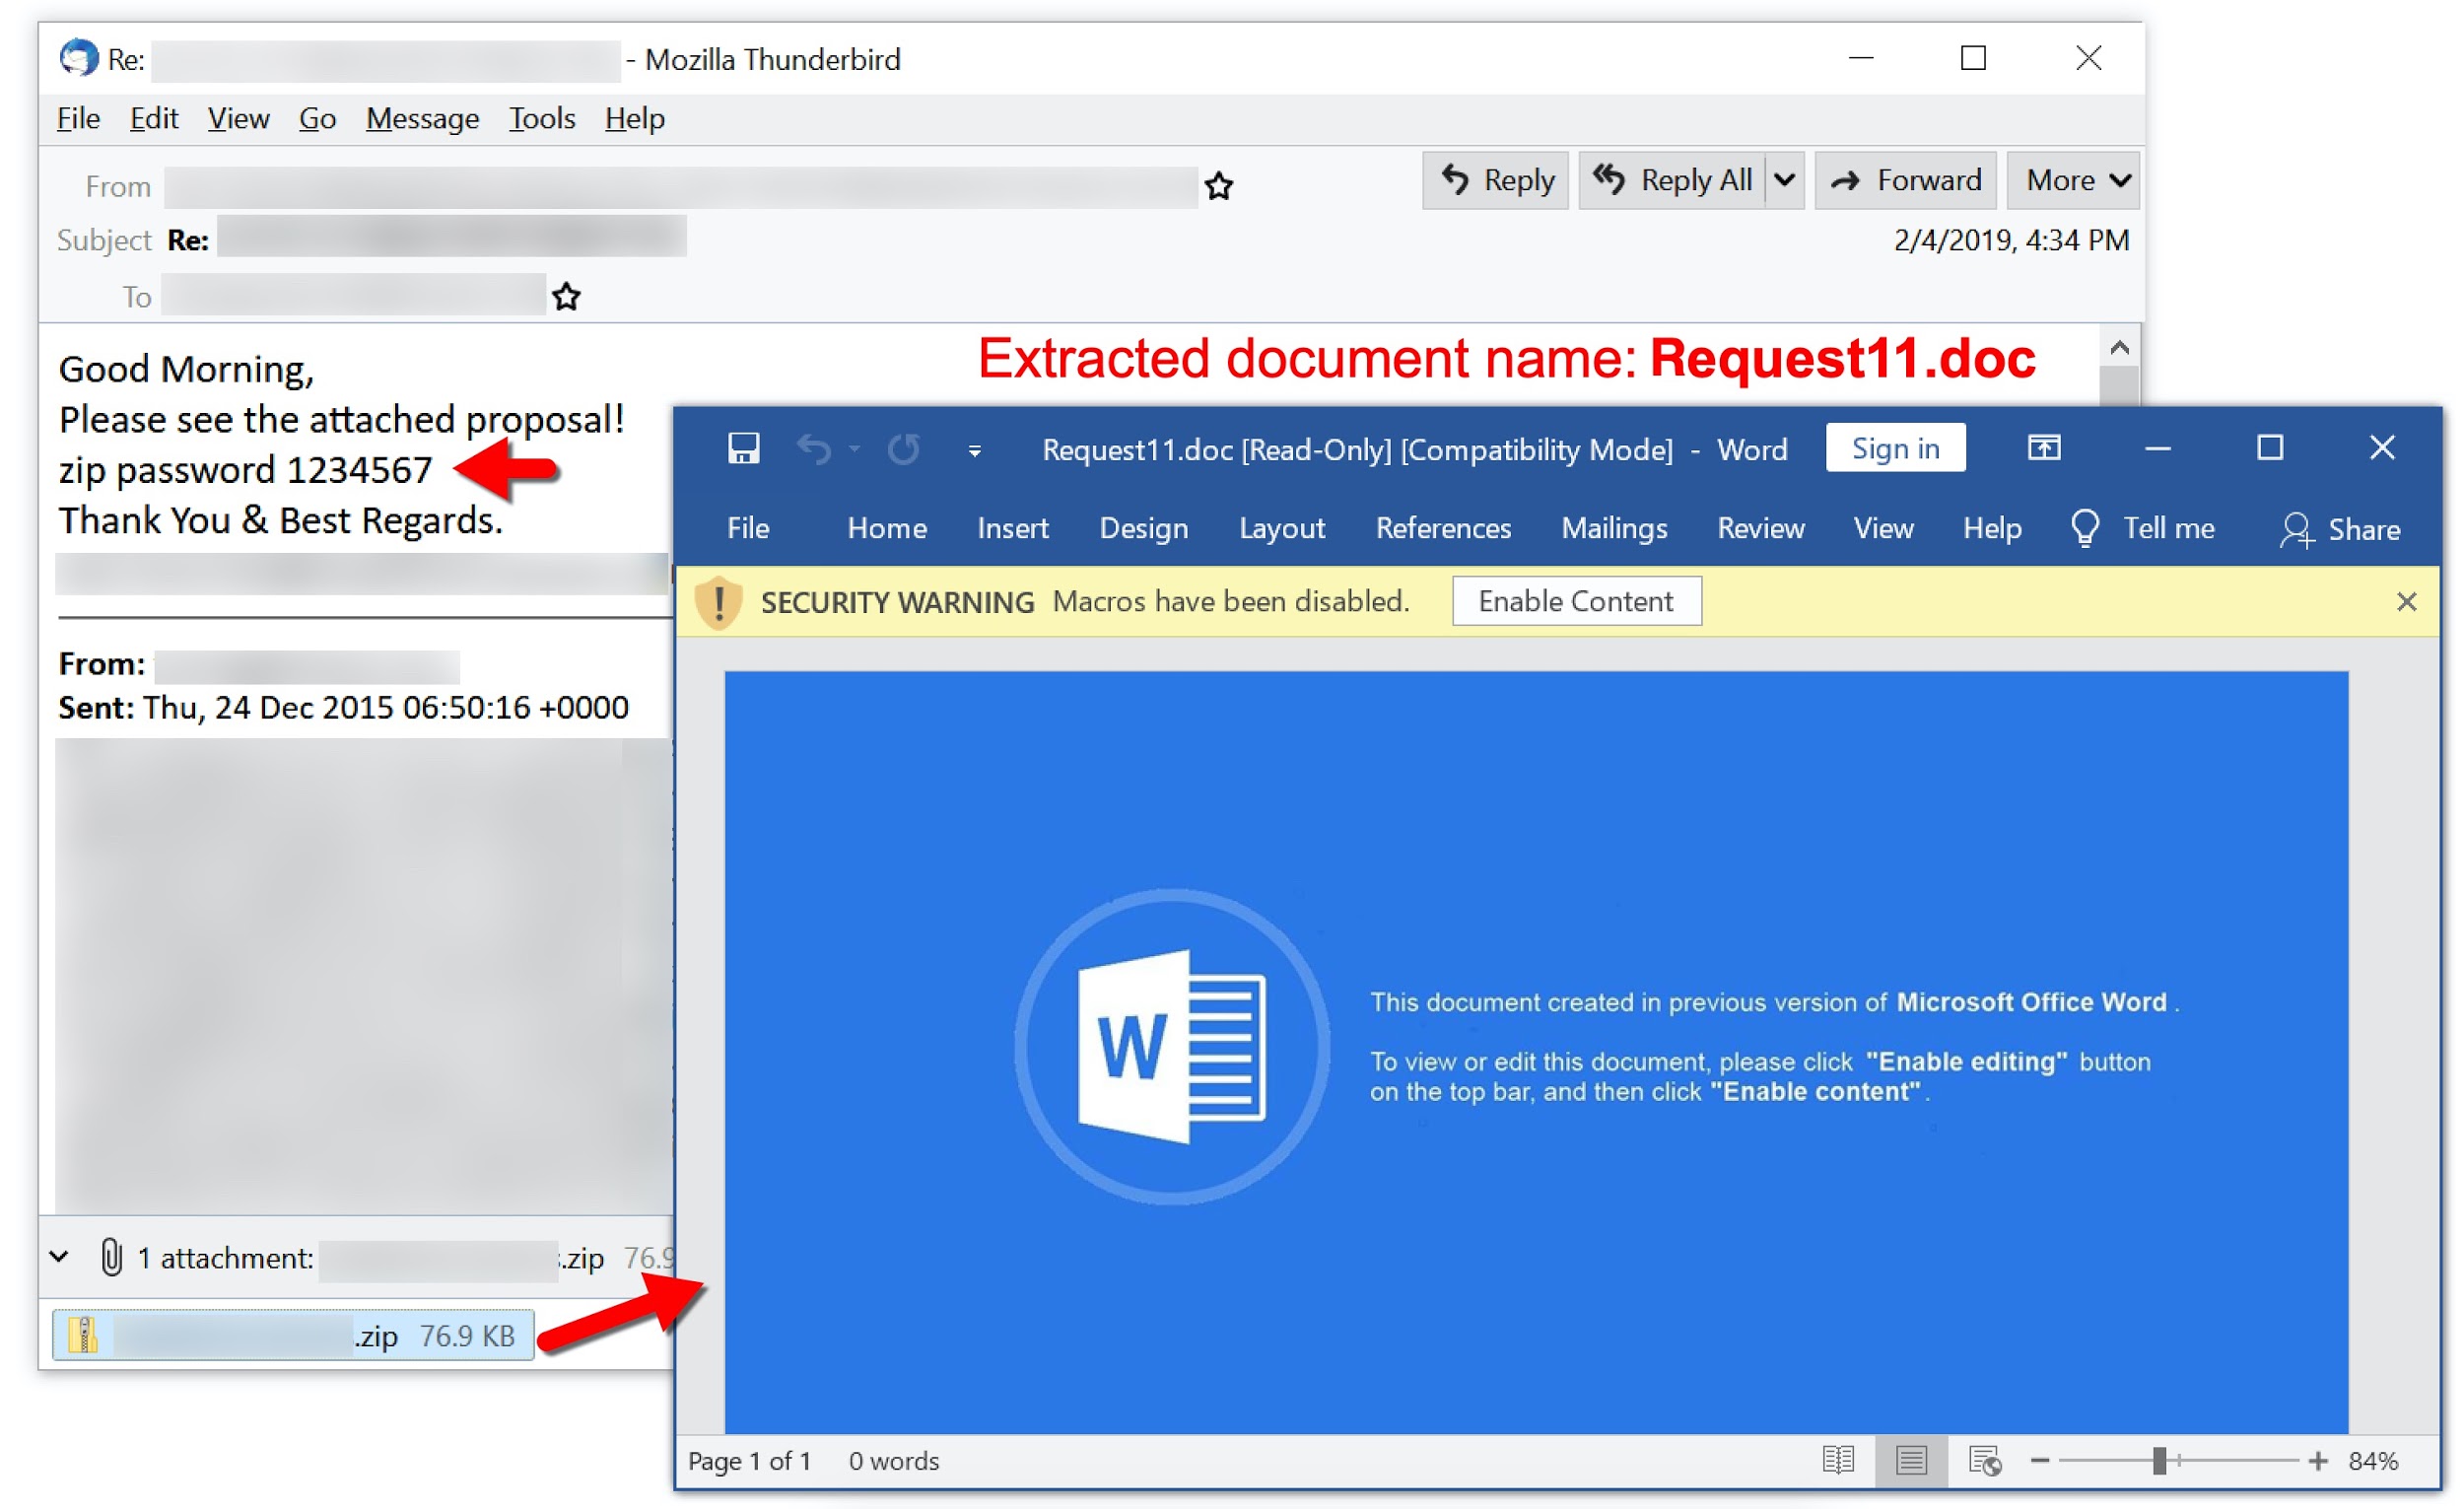 TA551 malspam from February 2019 includes extracted document name: Request11.doc